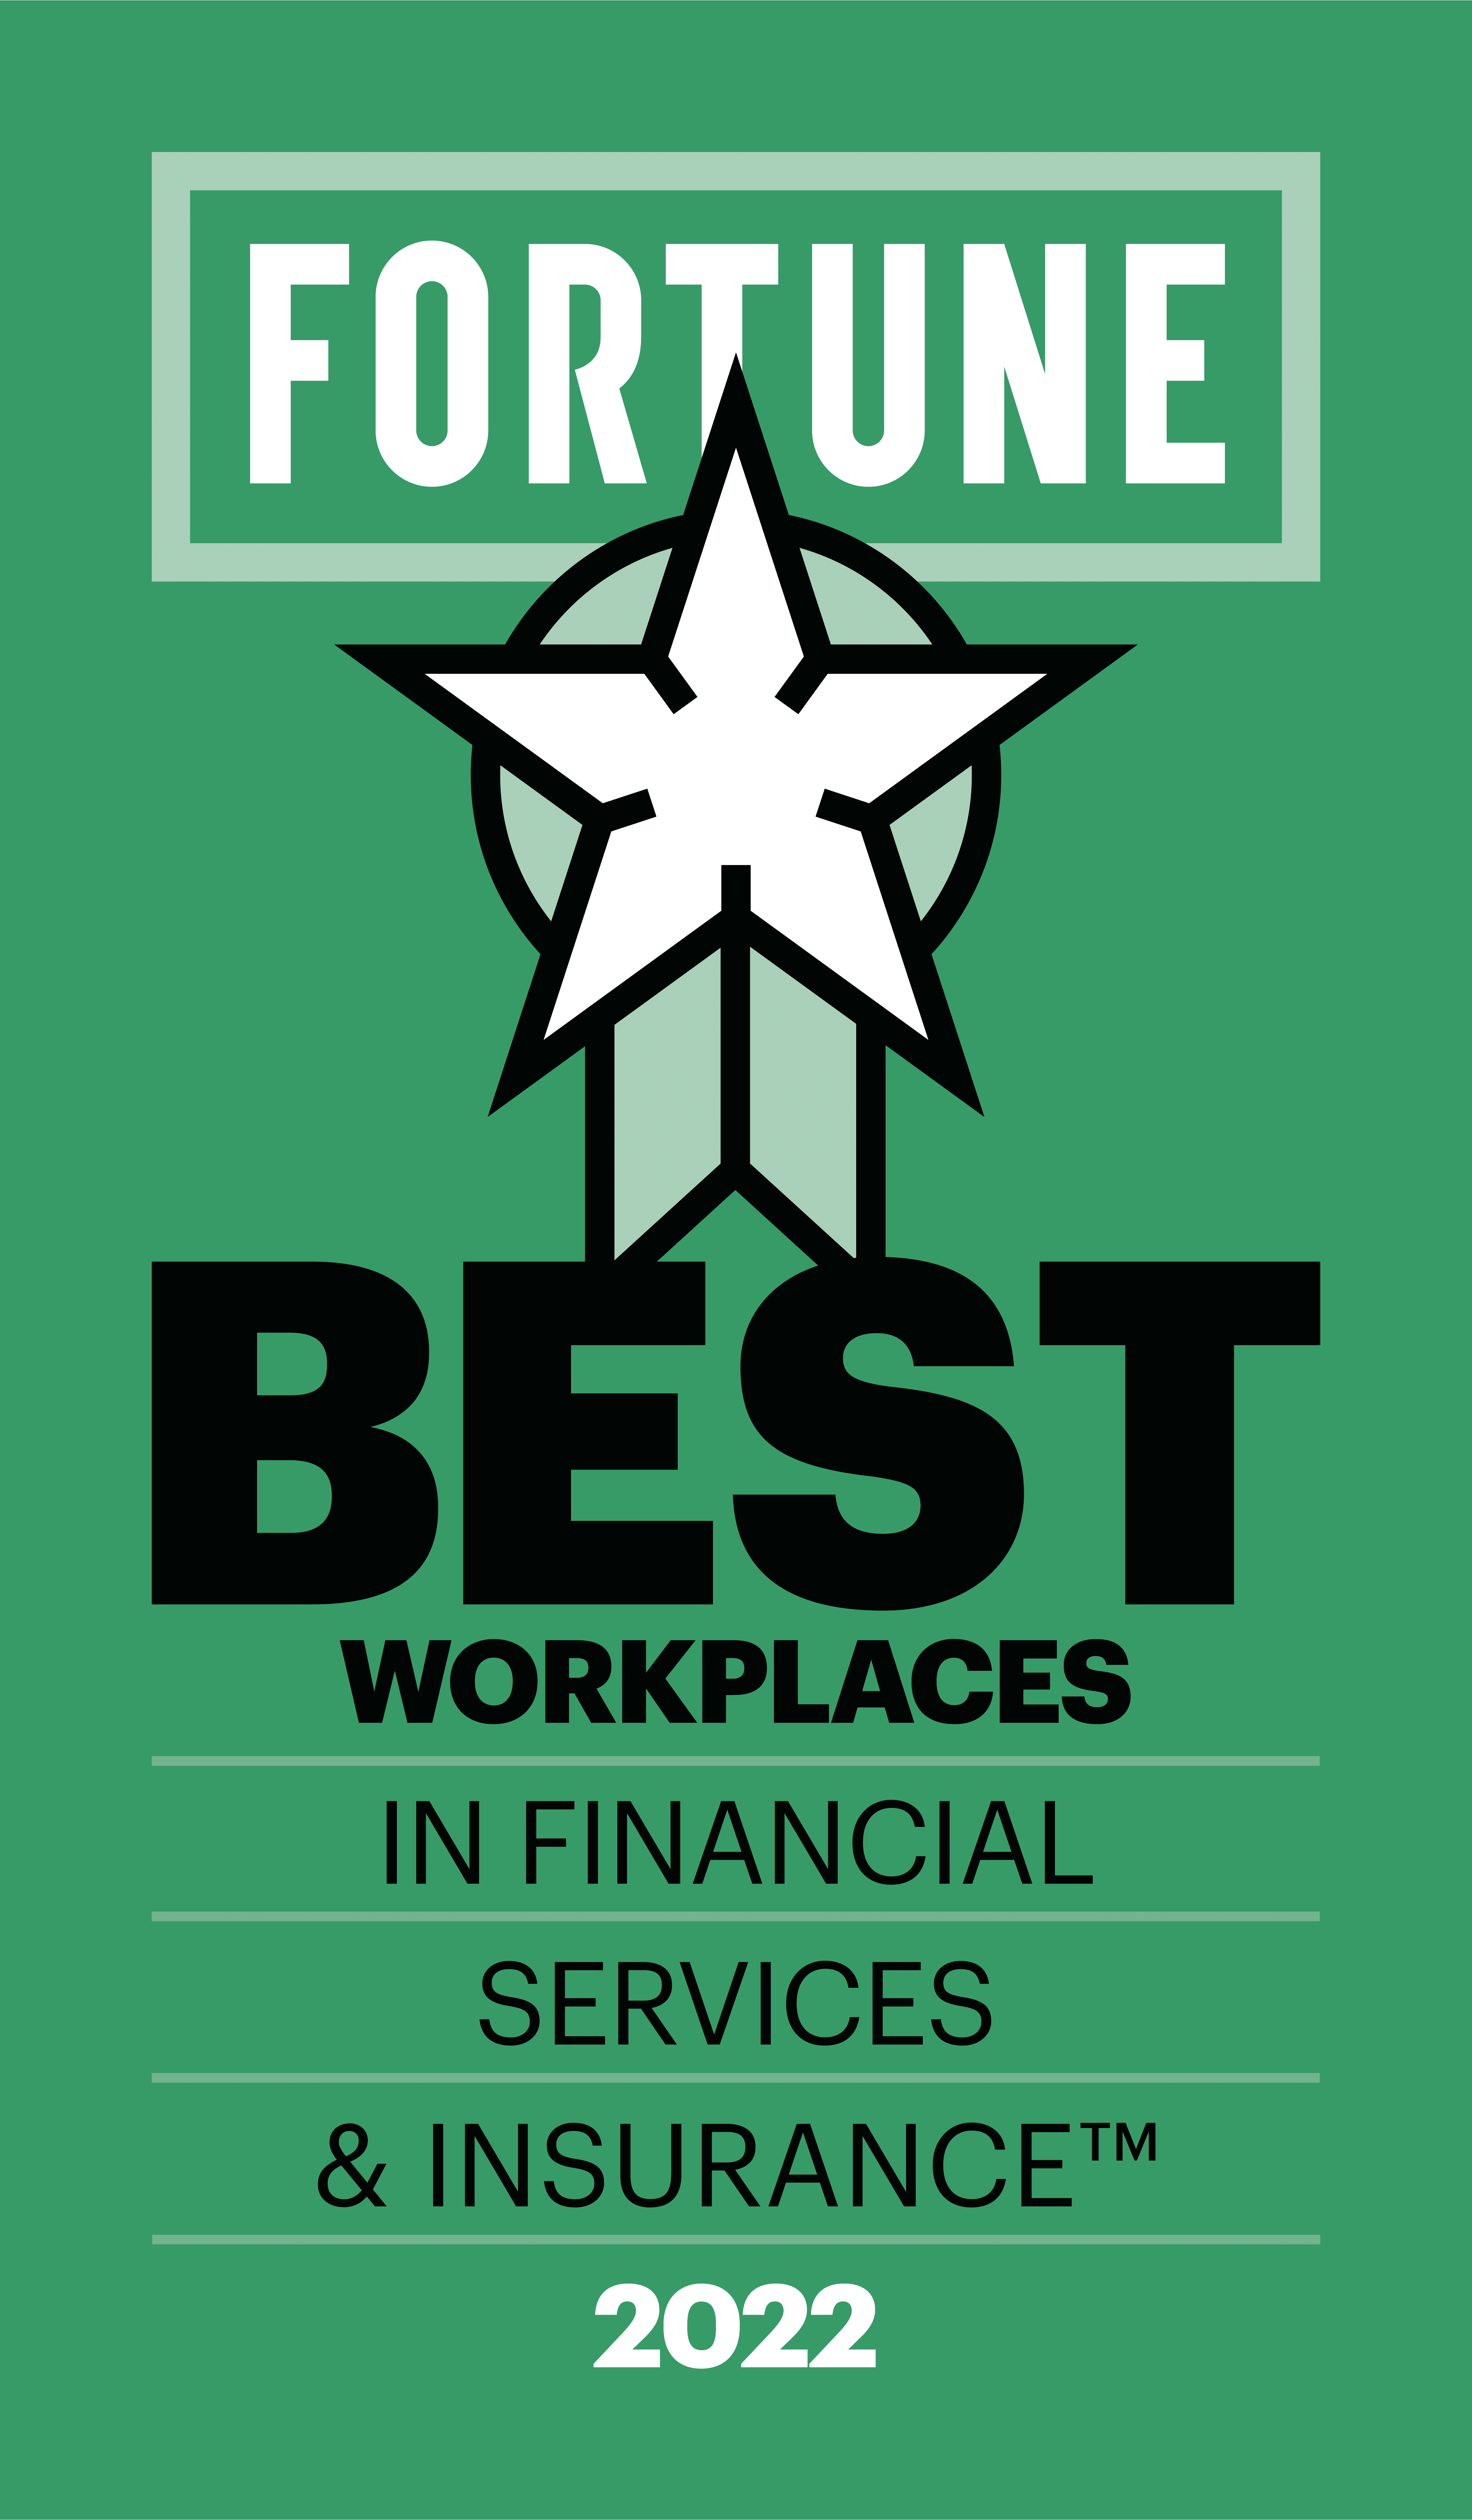 Fortune Best Workplaces in Financial Services and Insurance 2022